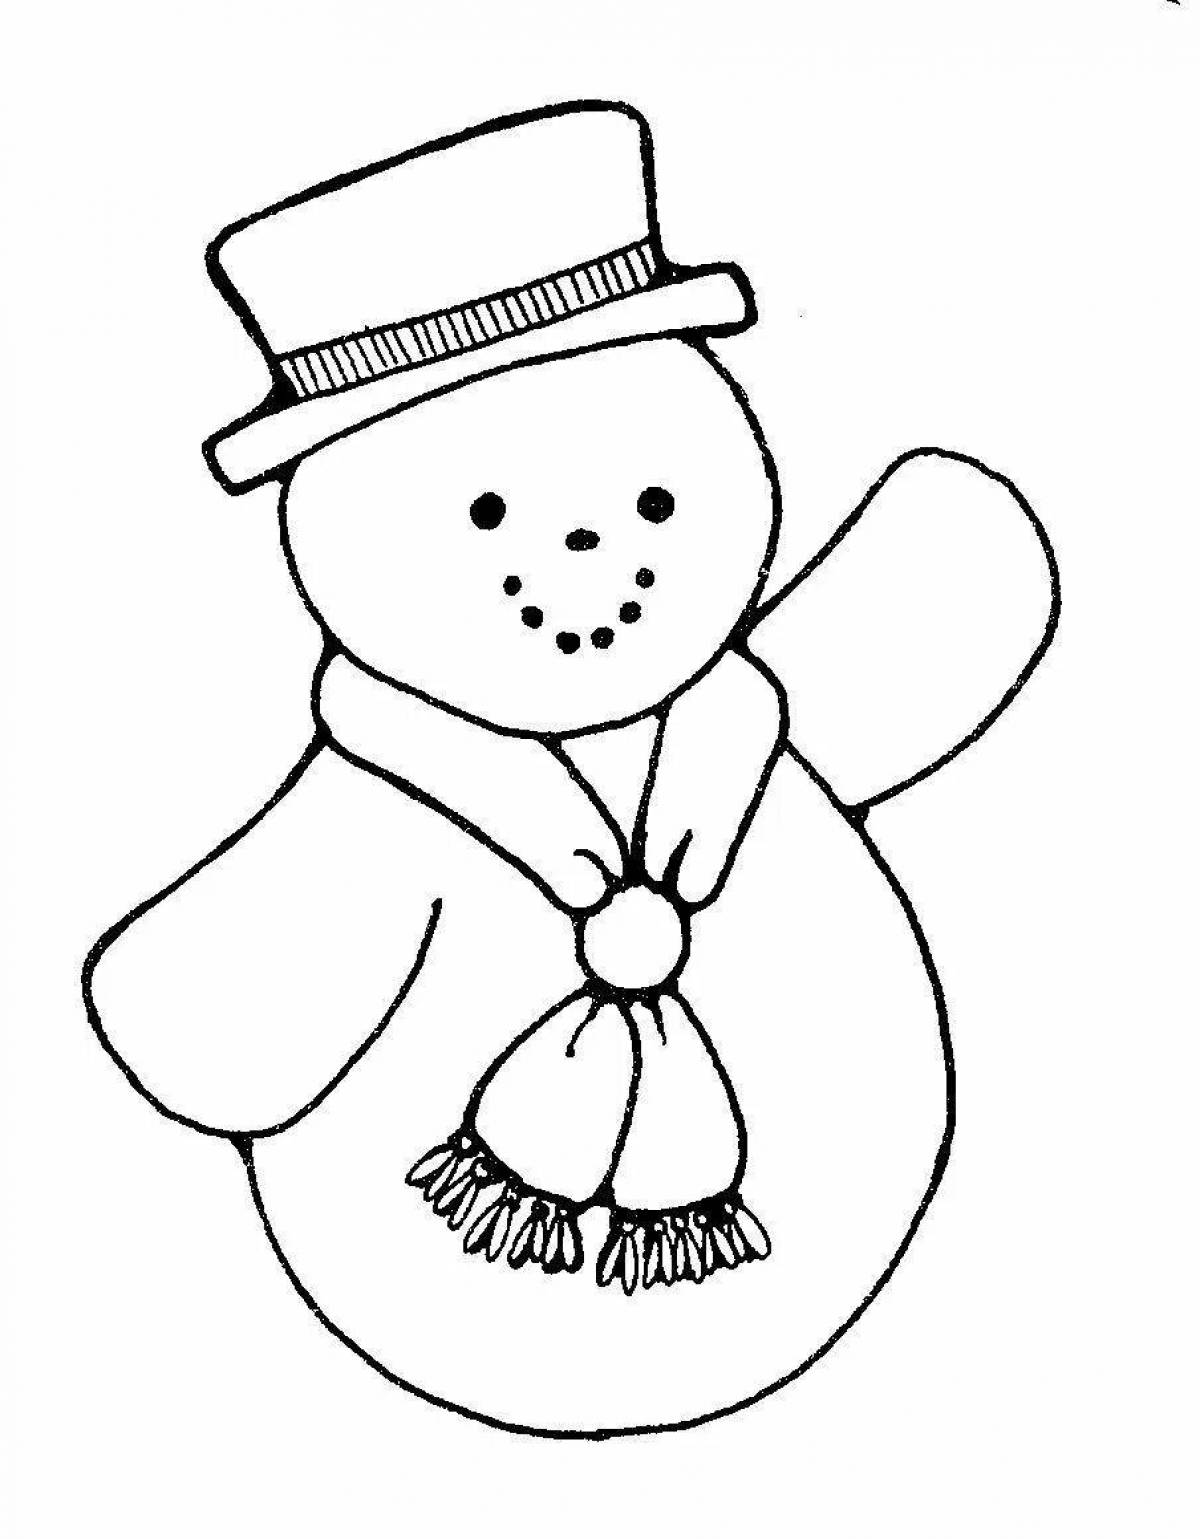 Dazzling coloring snowman without a nose